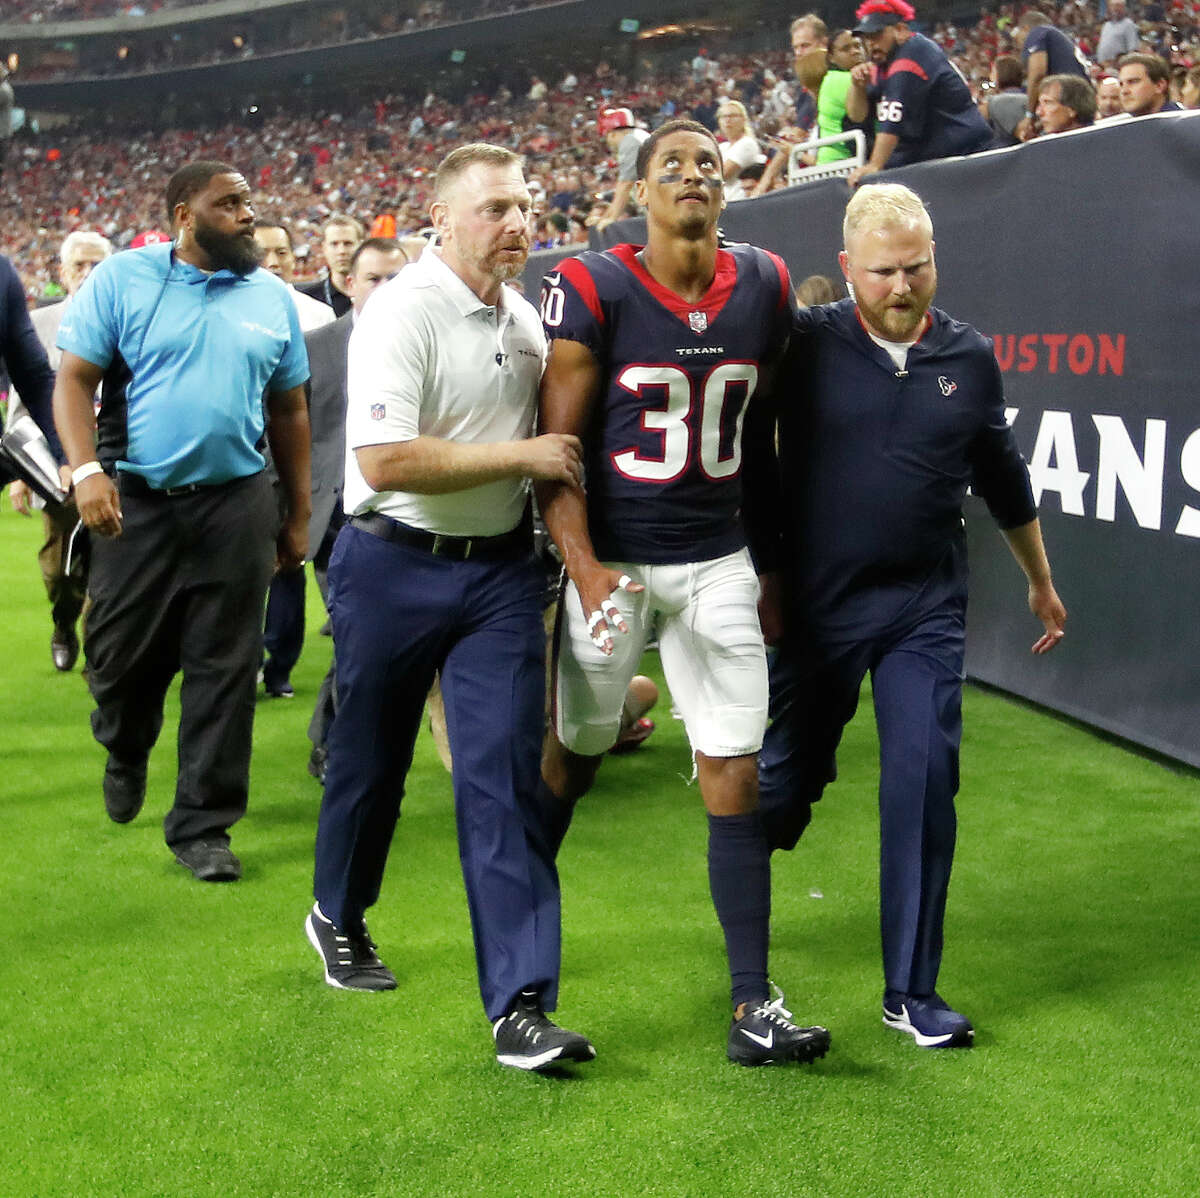 Houston Texans cornerback Kevin Johnson (30) is taken to the locker room after being injured on a play during the first quarter of an NLF preseason game at NRG Stadium, Saturday, August 18, 2018, in Houston.